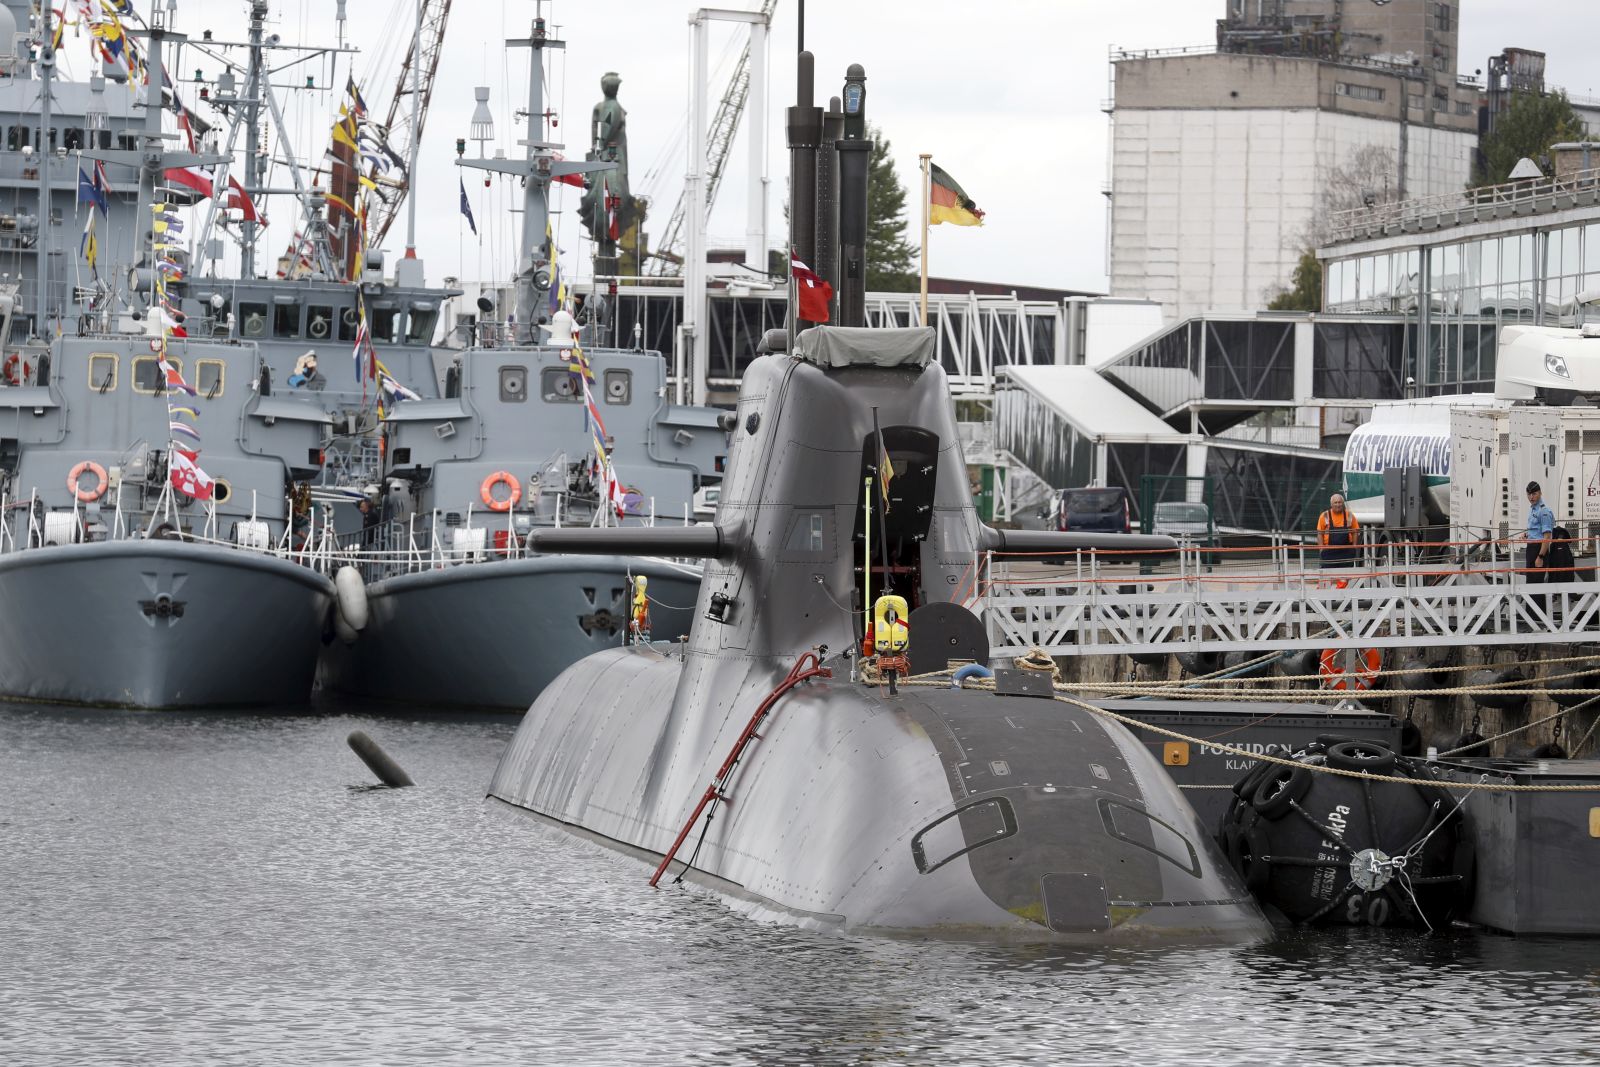 epa10848711 German Navy submarine U36 (front), frigates Hamburg and Hessen (L) are seen during a press conference about exercise Northern Coasts 2023 at German Navy frigate Hamburg in Riga, Latvia, 08 September 2023. This year's maritime exercise Northern Coasts (NOCO), one of the most important multinational exercises to strengthen cooperation between Germany's naval forces and its partners in the Baltic Sea region, will take place from 09 to 23 September, while the German Navy will be responsible for planning and conducting the exercise this year, according to a press statement.  EPA/TOMS KALNINS